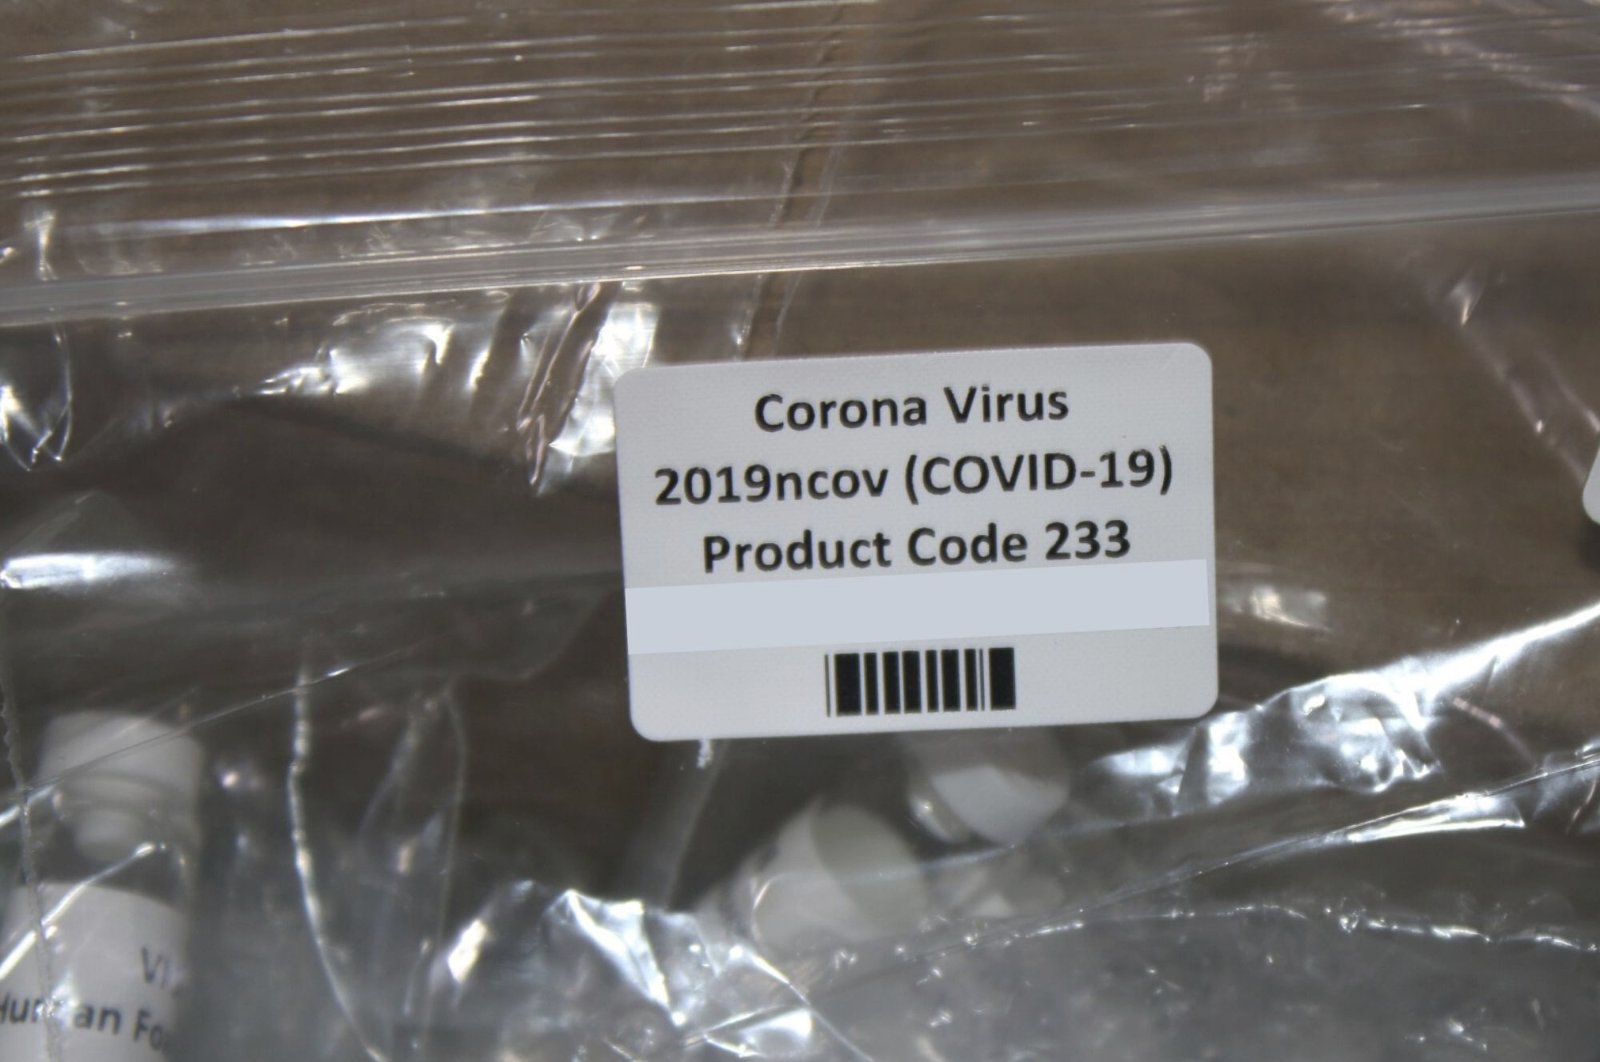 The U.S. Customs and Border Protection (CBP), shows a package containing suspected counterfeit COVID-19 test kits arriving from the U.K., March 12, 2020. (AP Photo)